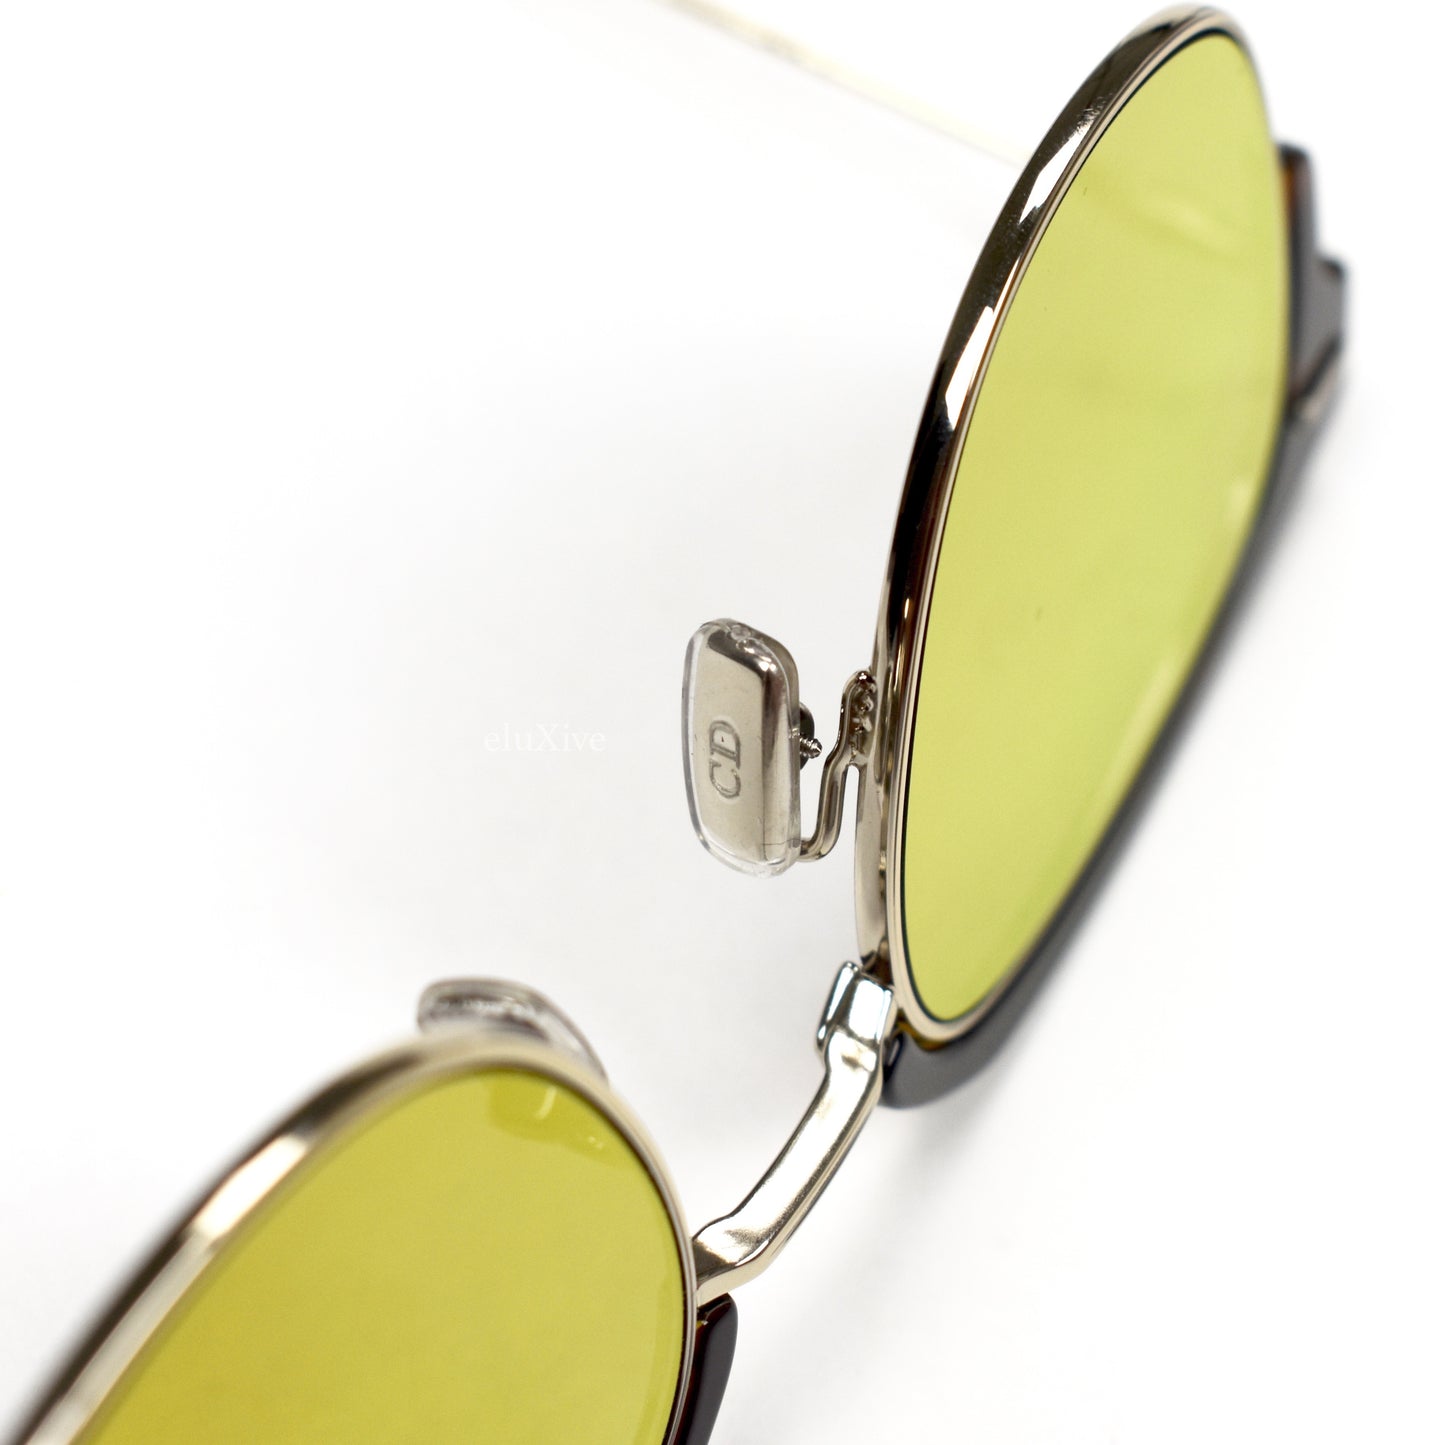 Dior - Gold Lens Tensity Clubmaster Sunglasses